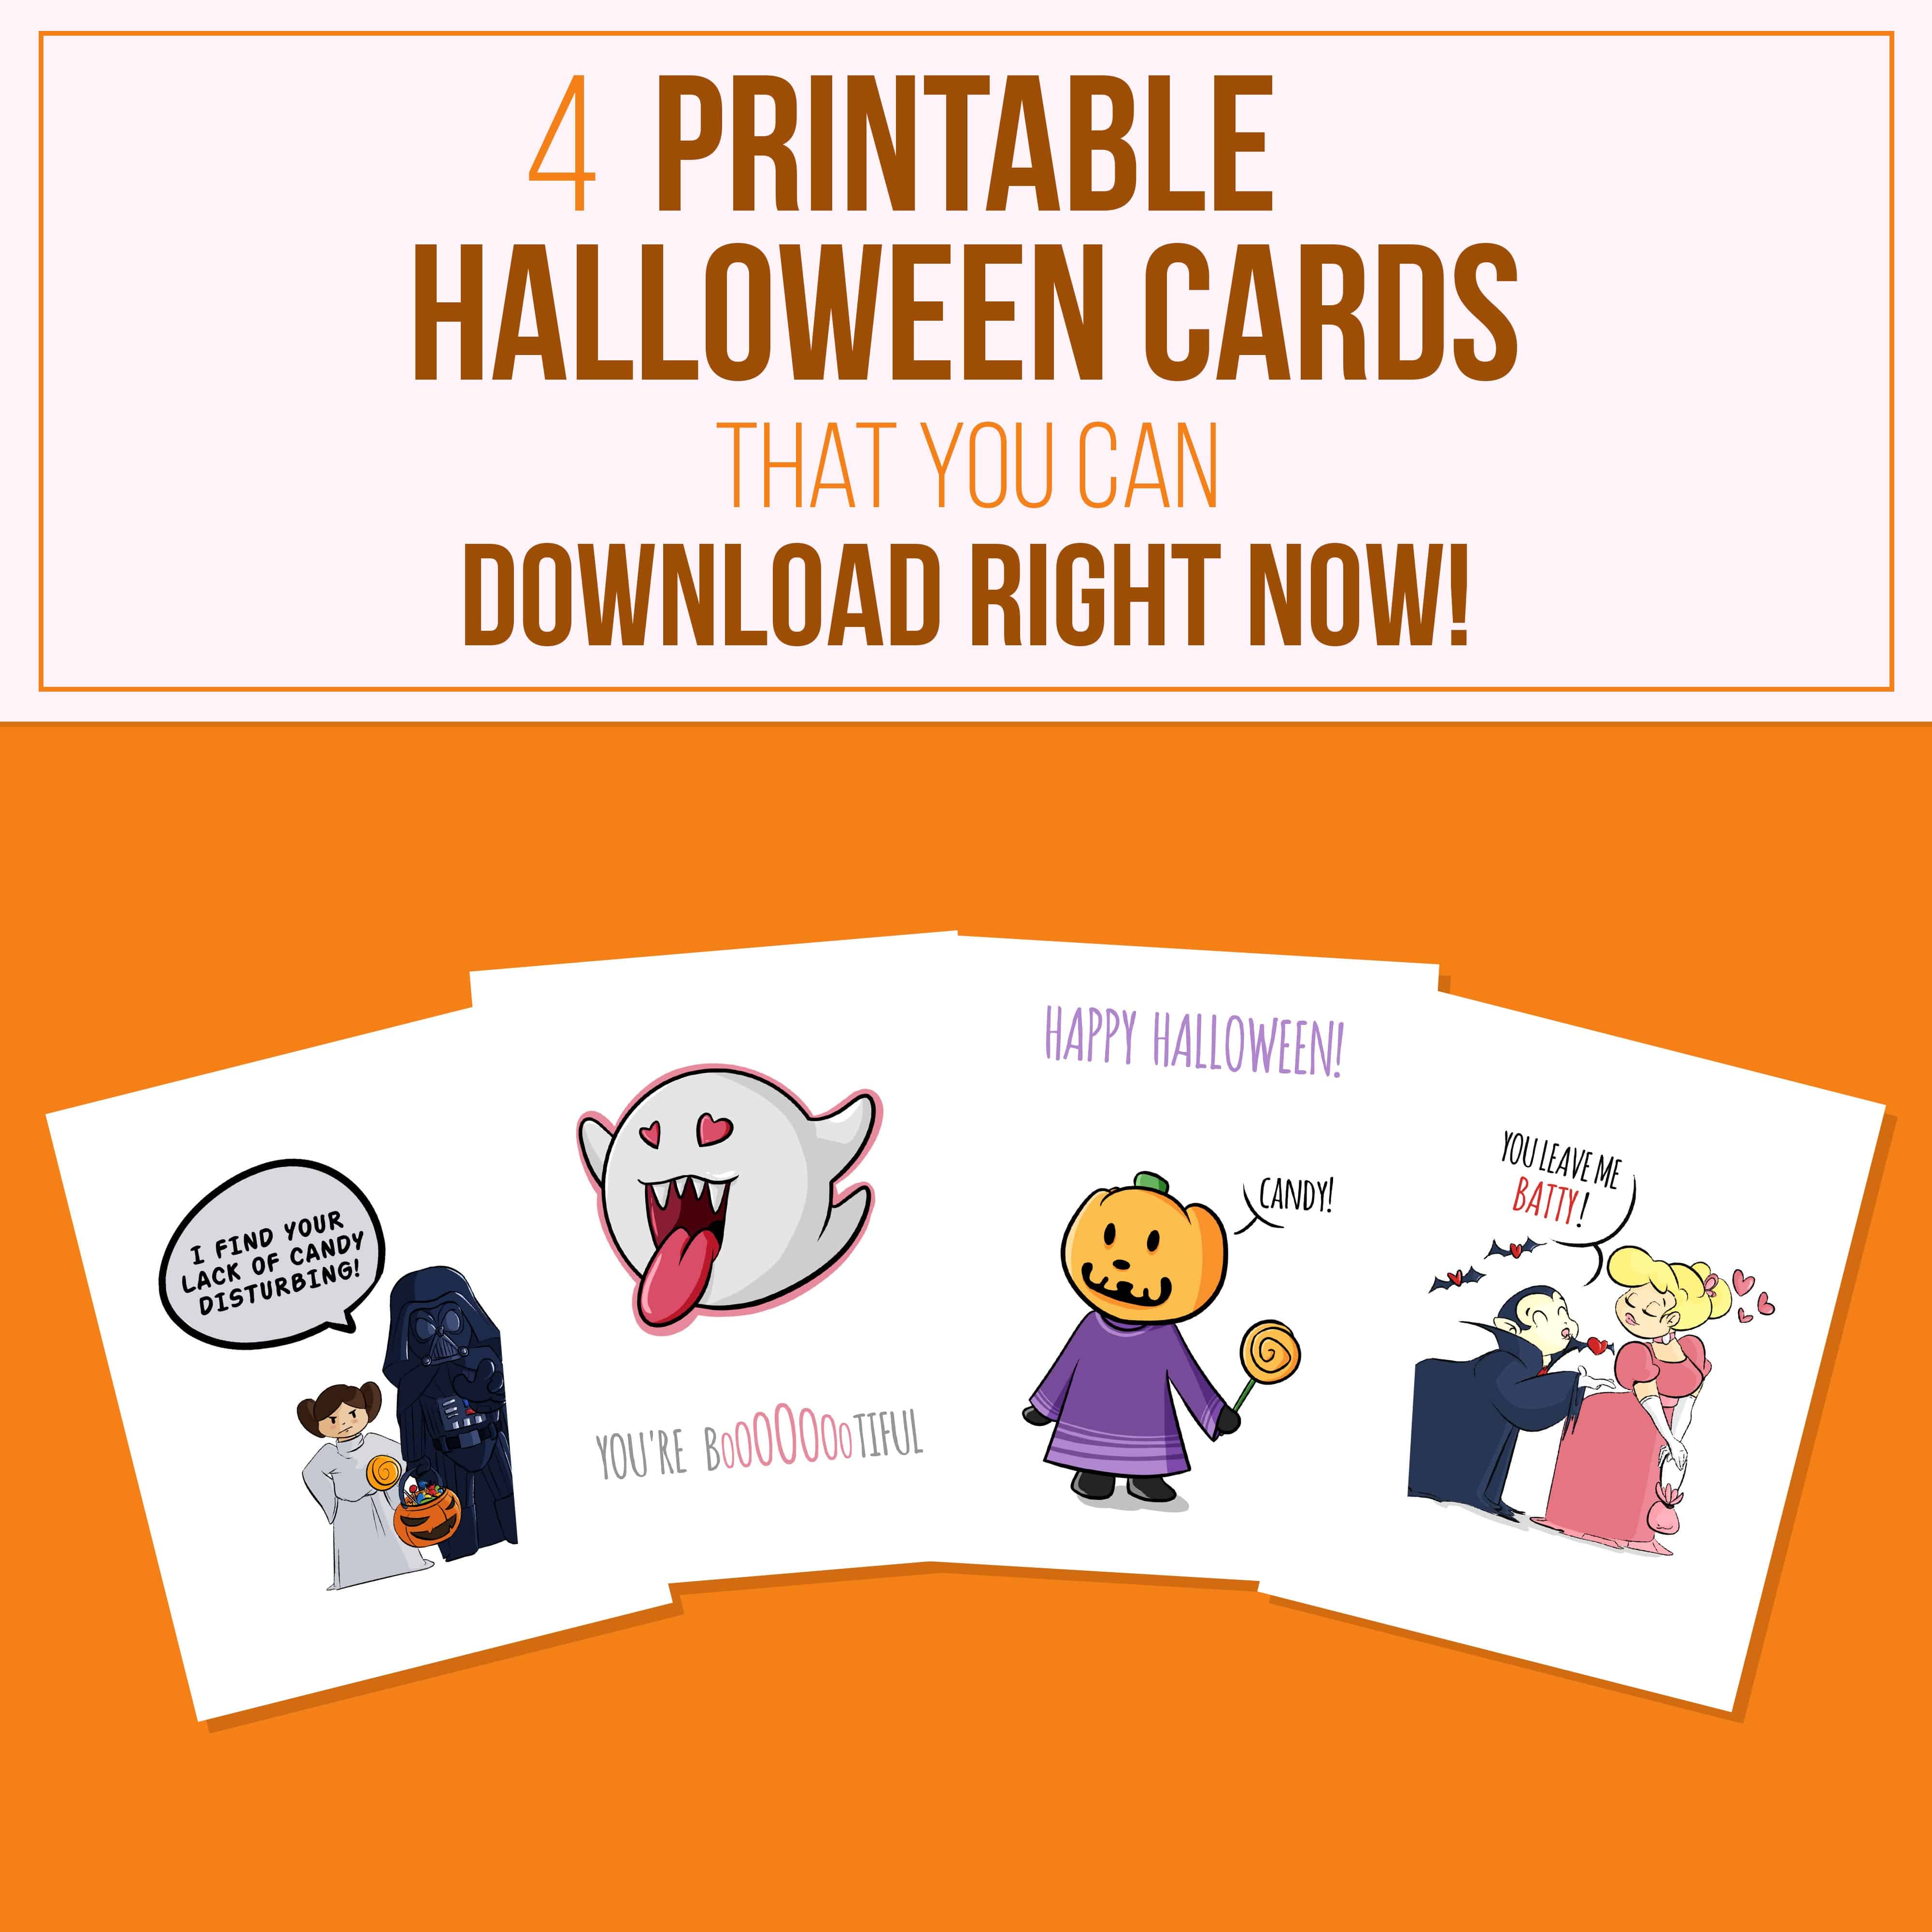 4 Printable Halloween Cards That You Can Download Right Now!